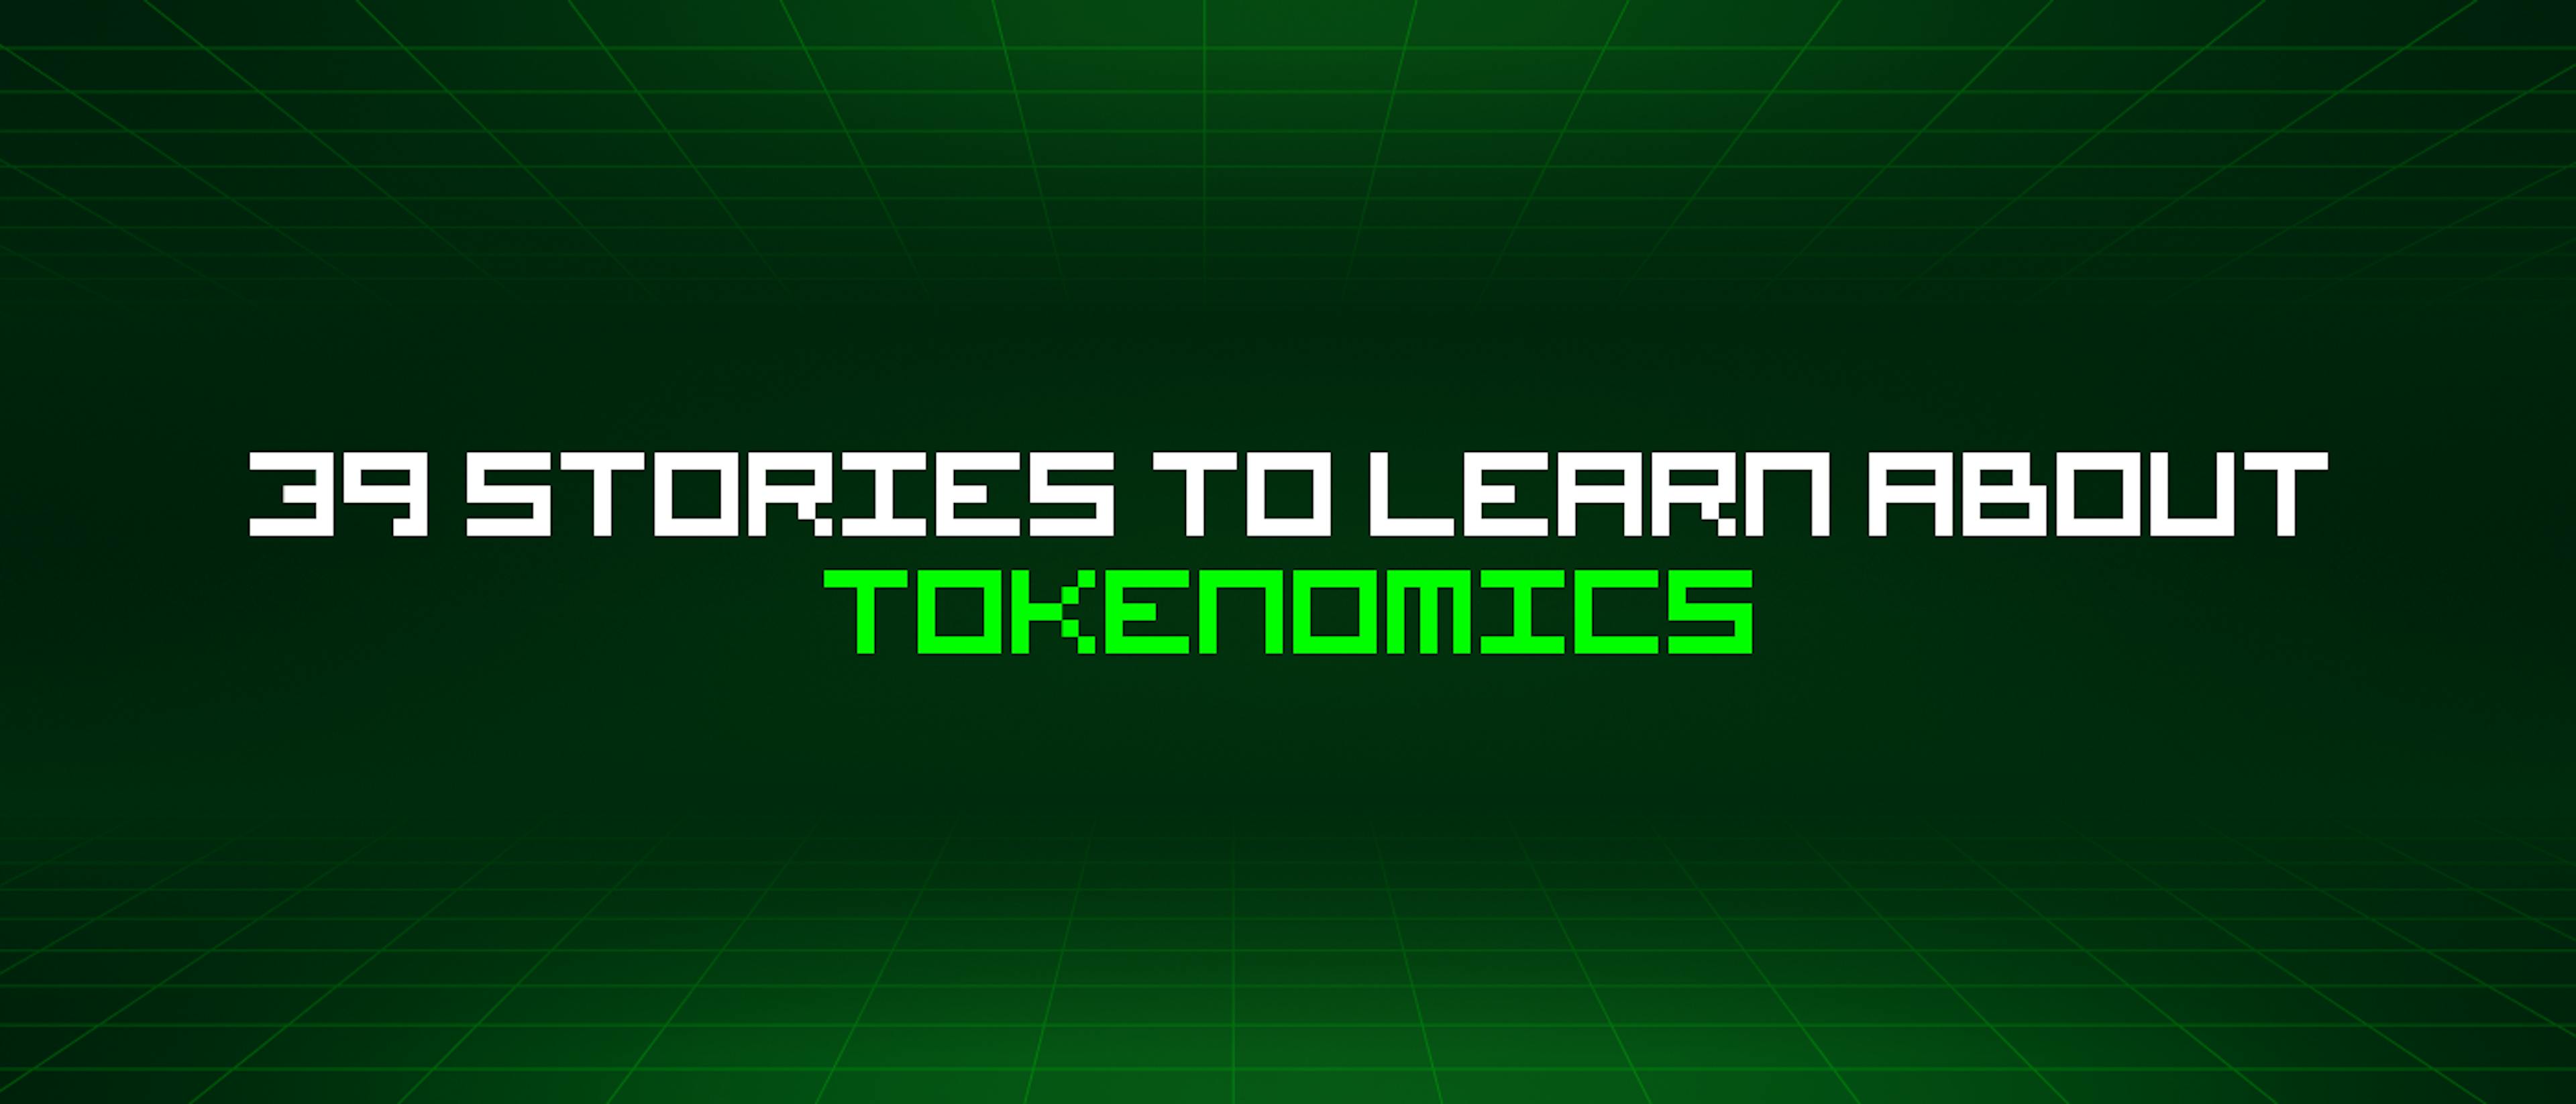 featured image - 39 Stories To Learn About Tokenomics